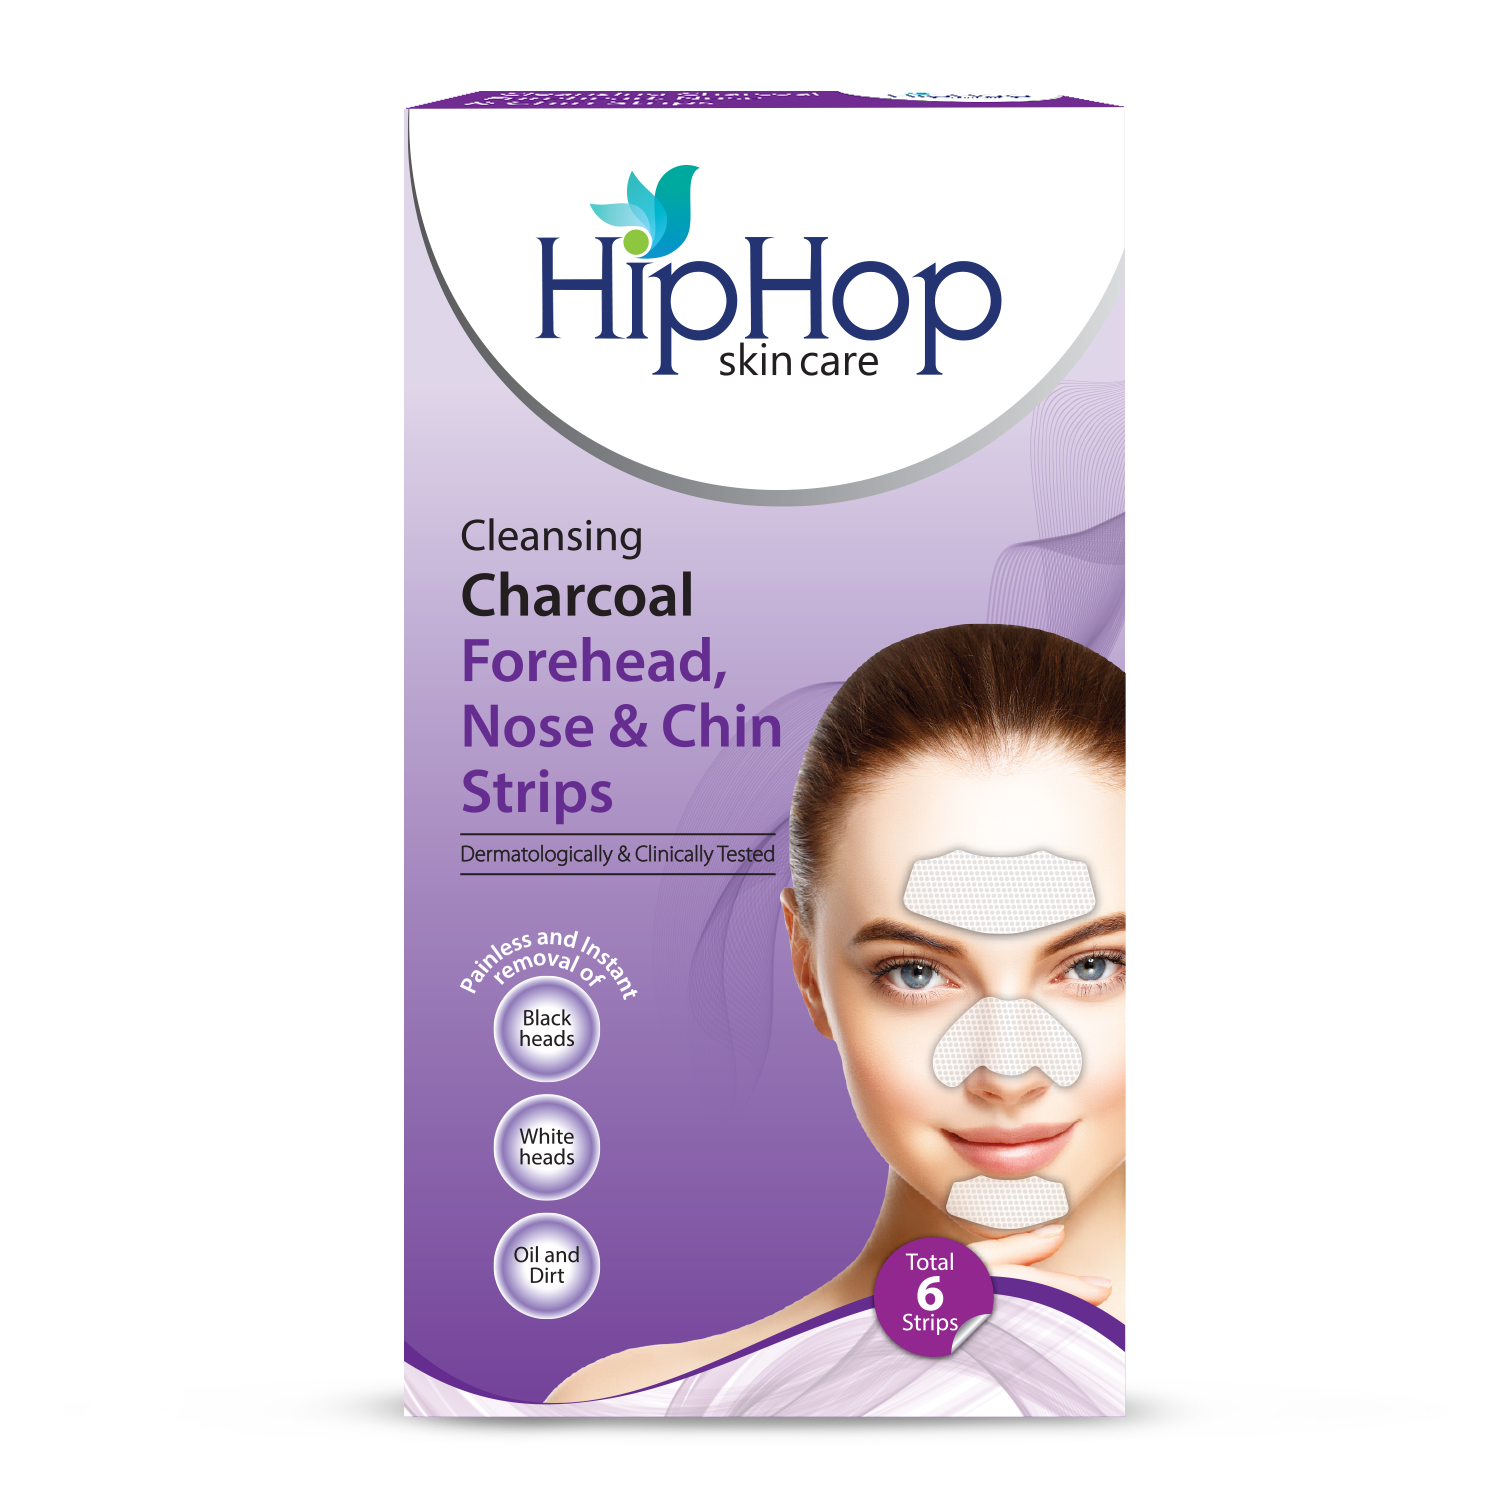 Chin, Nose &amp; Forehead Strips - 6 Strips